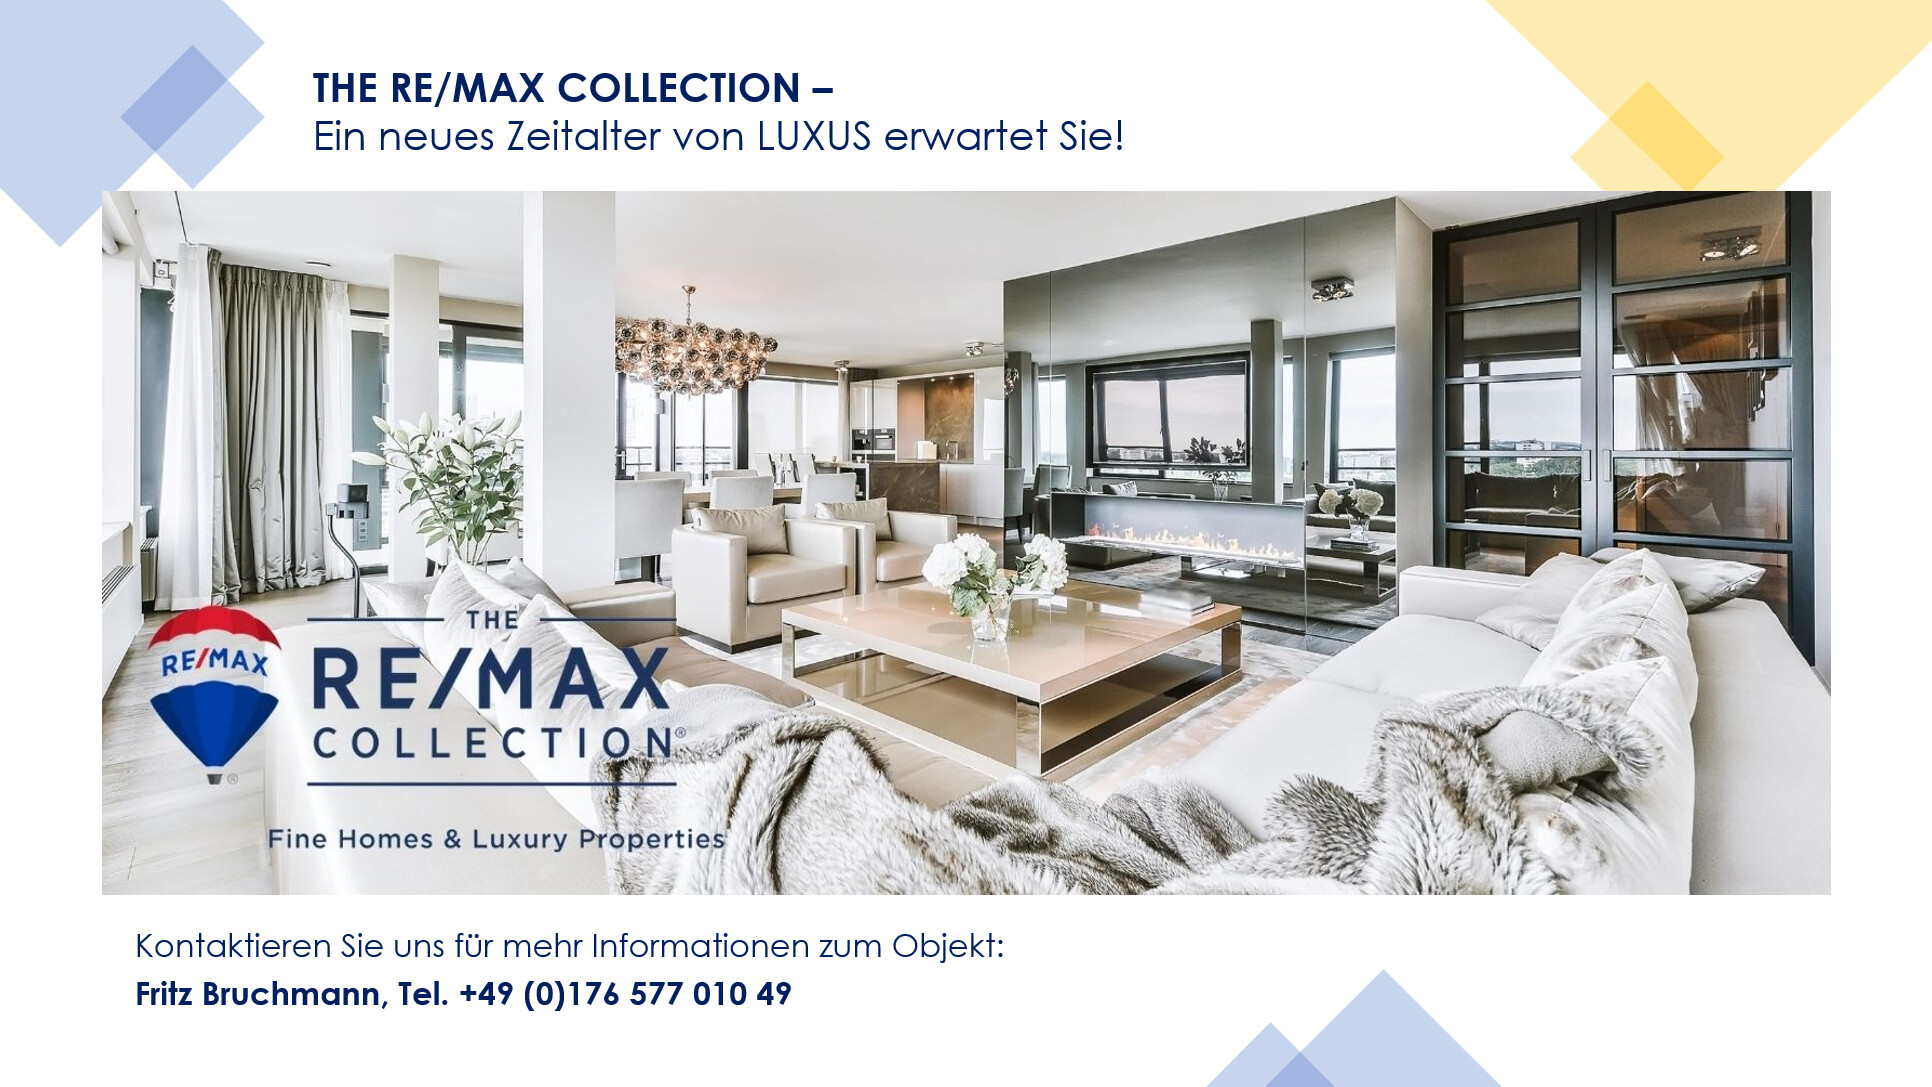 REMAX_THE LUXURY COLLECTION_1